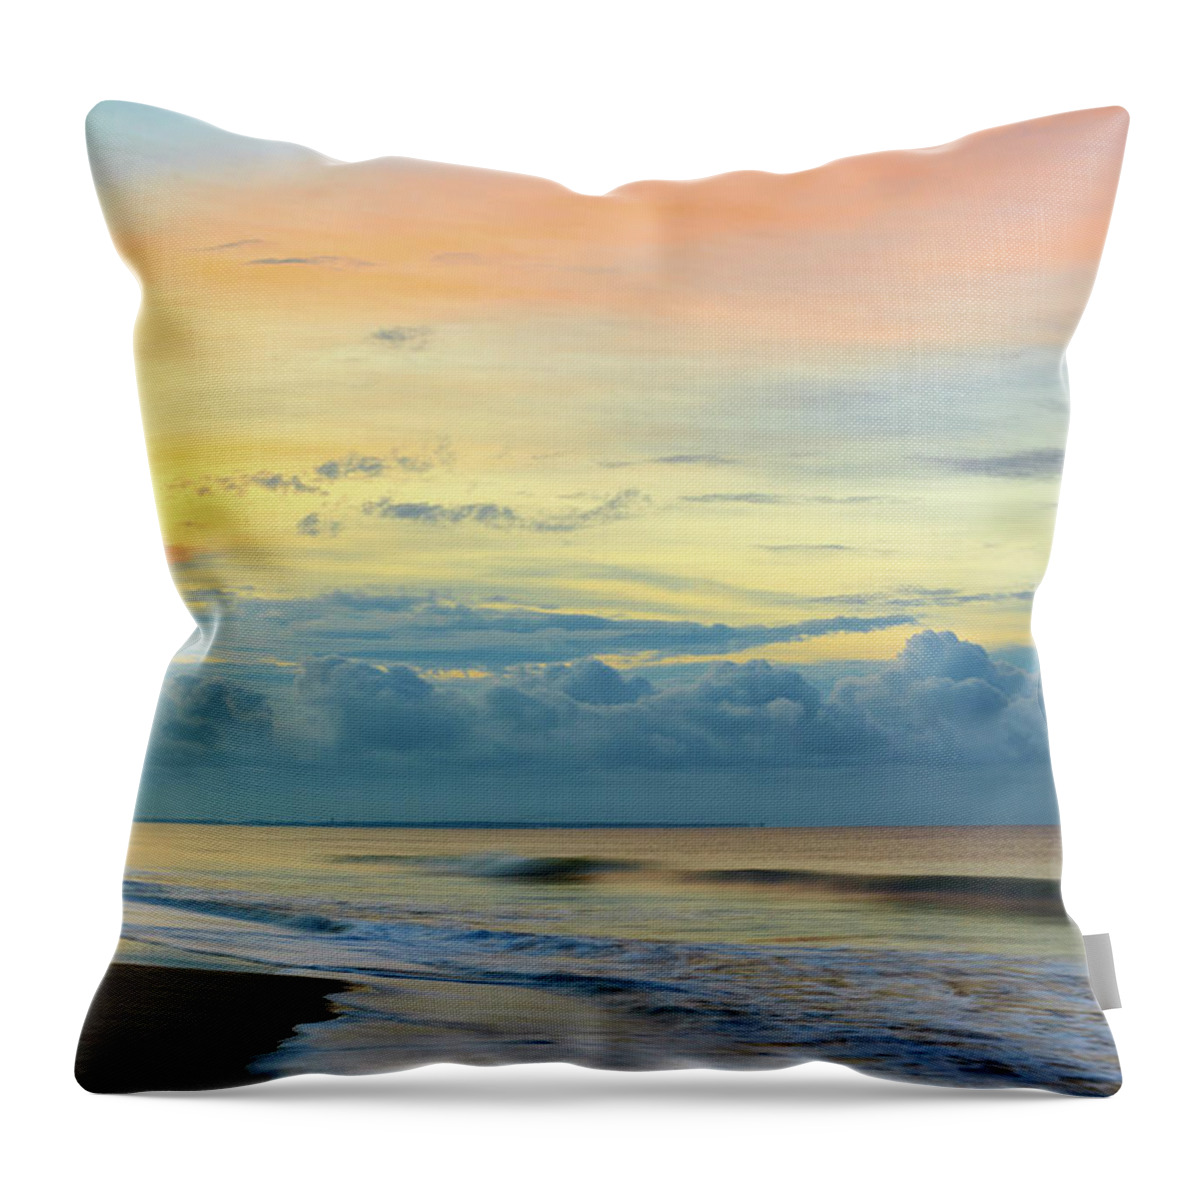 Oak Island Throw Pillow featuring the photograph Oak Island Morning by Nick Noble